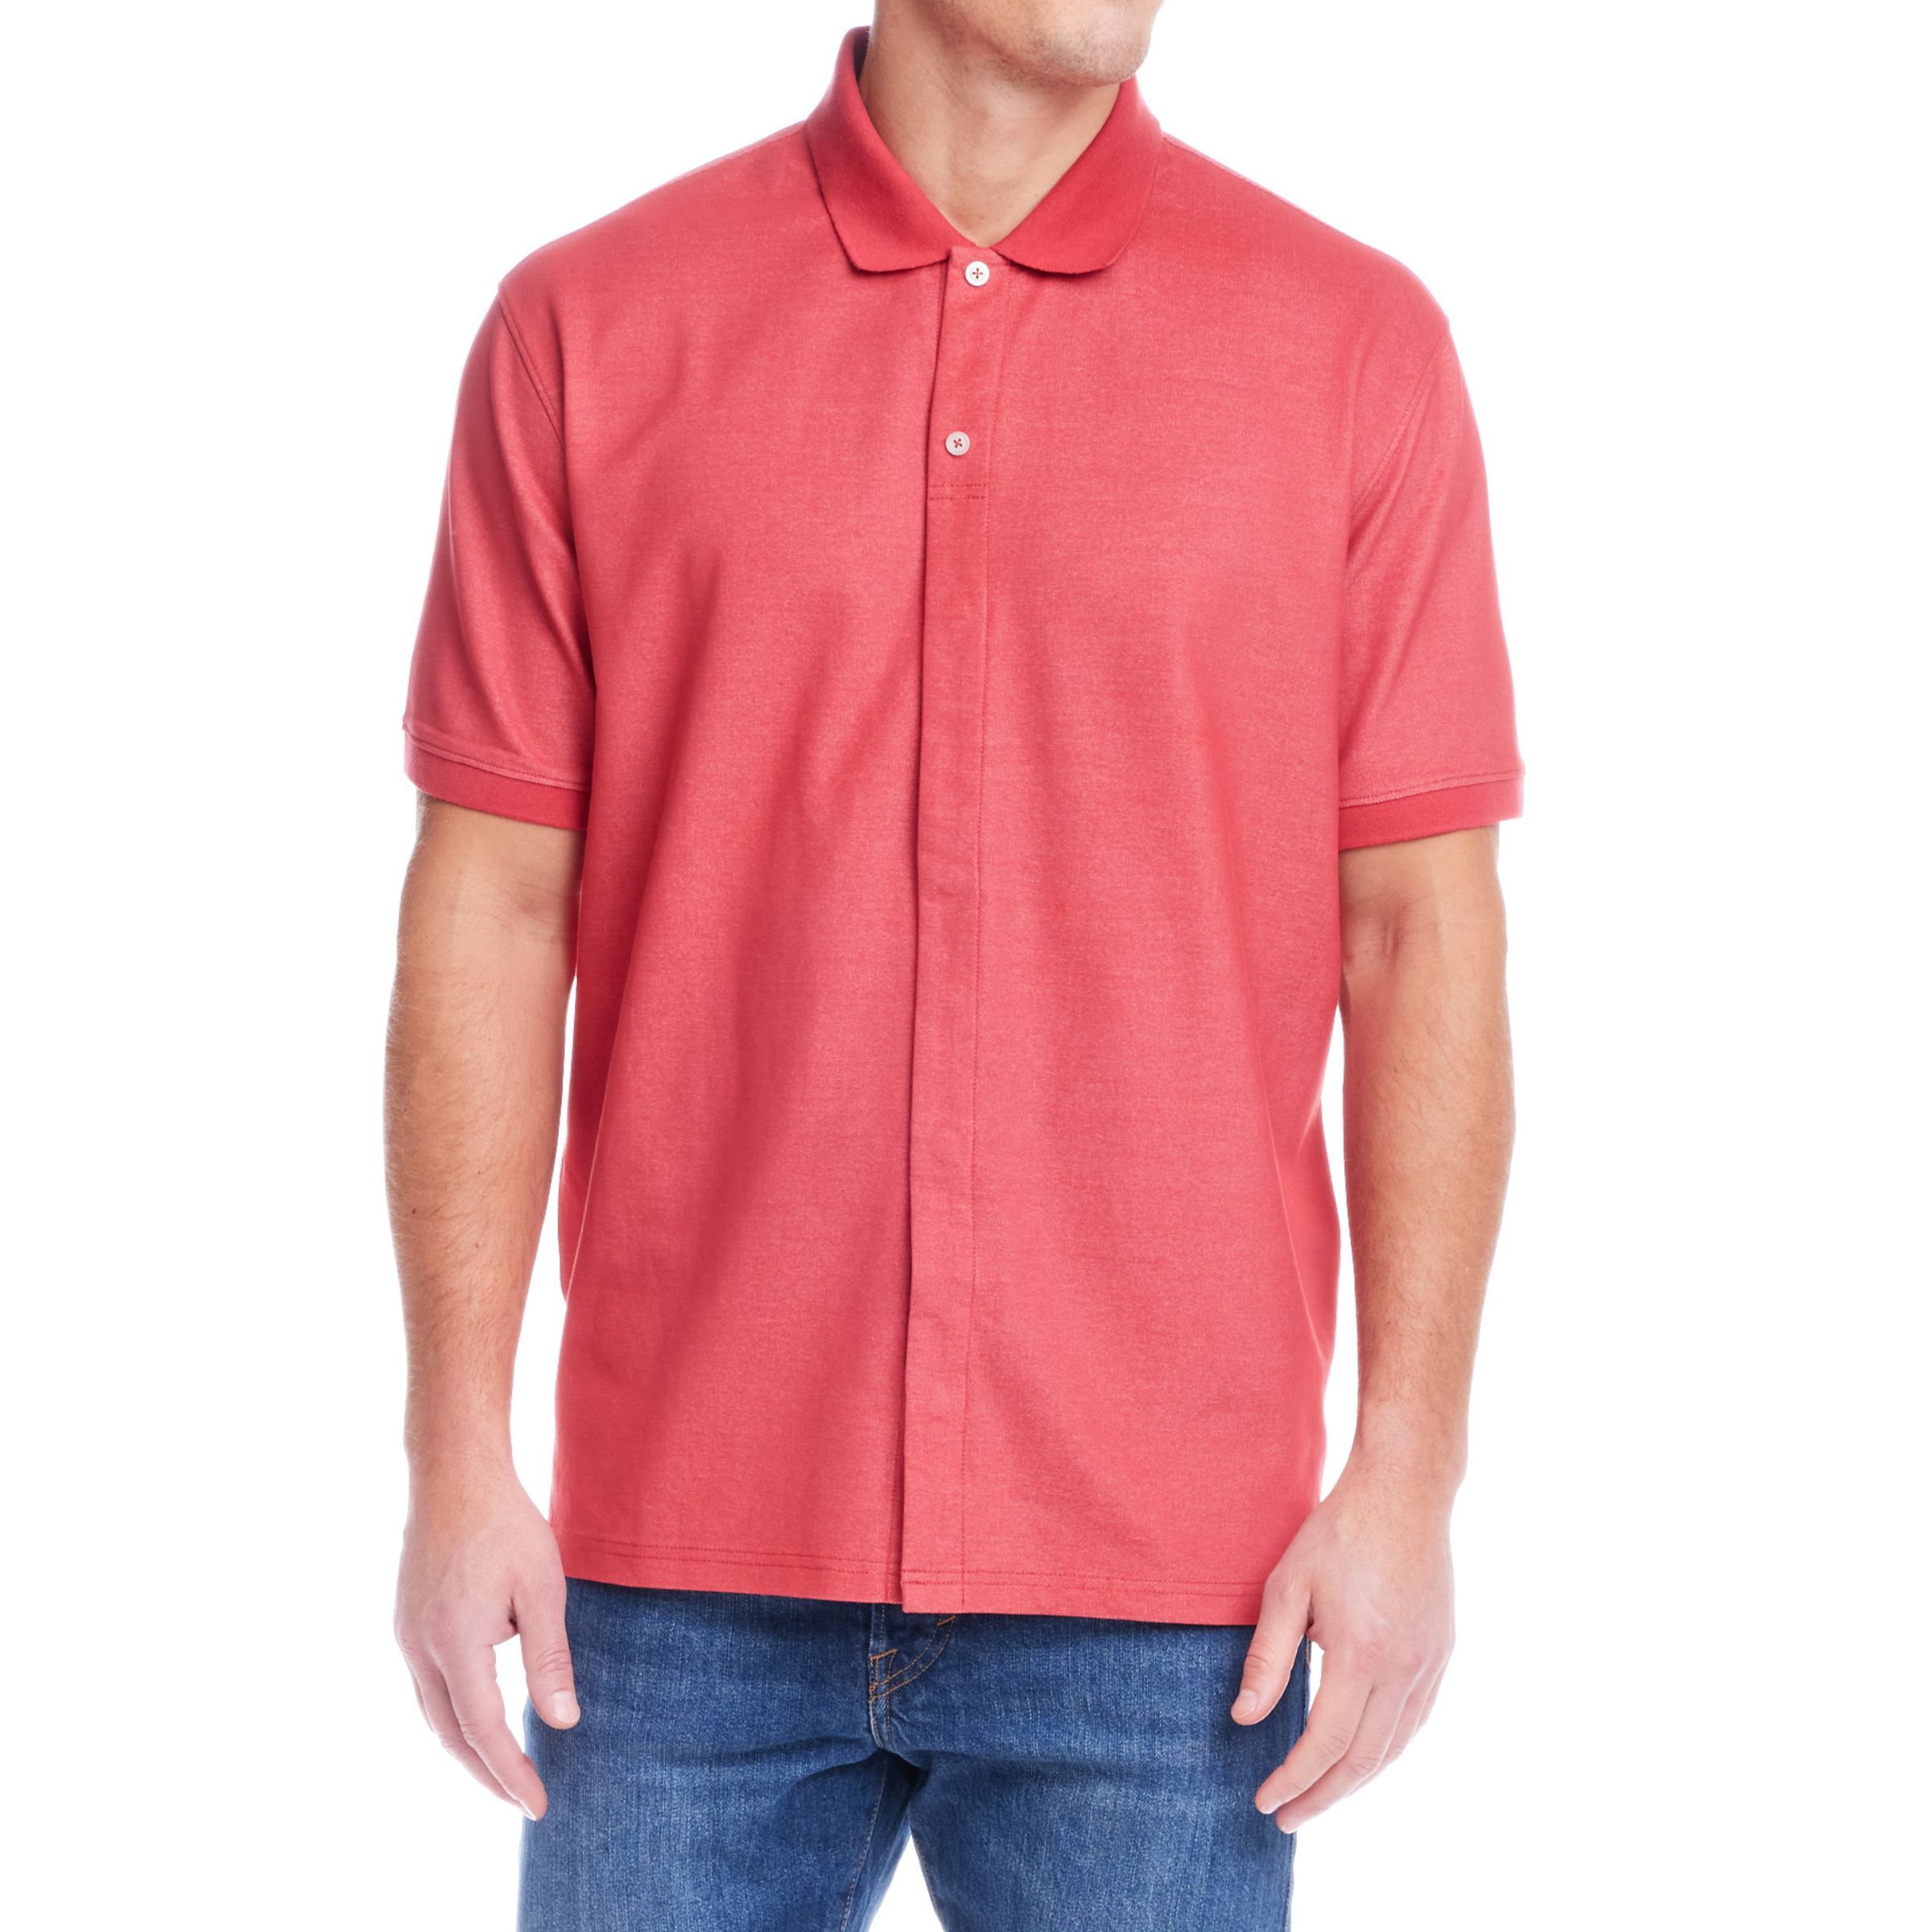 Red Heather Pique Knit Short Sleeve Polo with Magnetic Closures